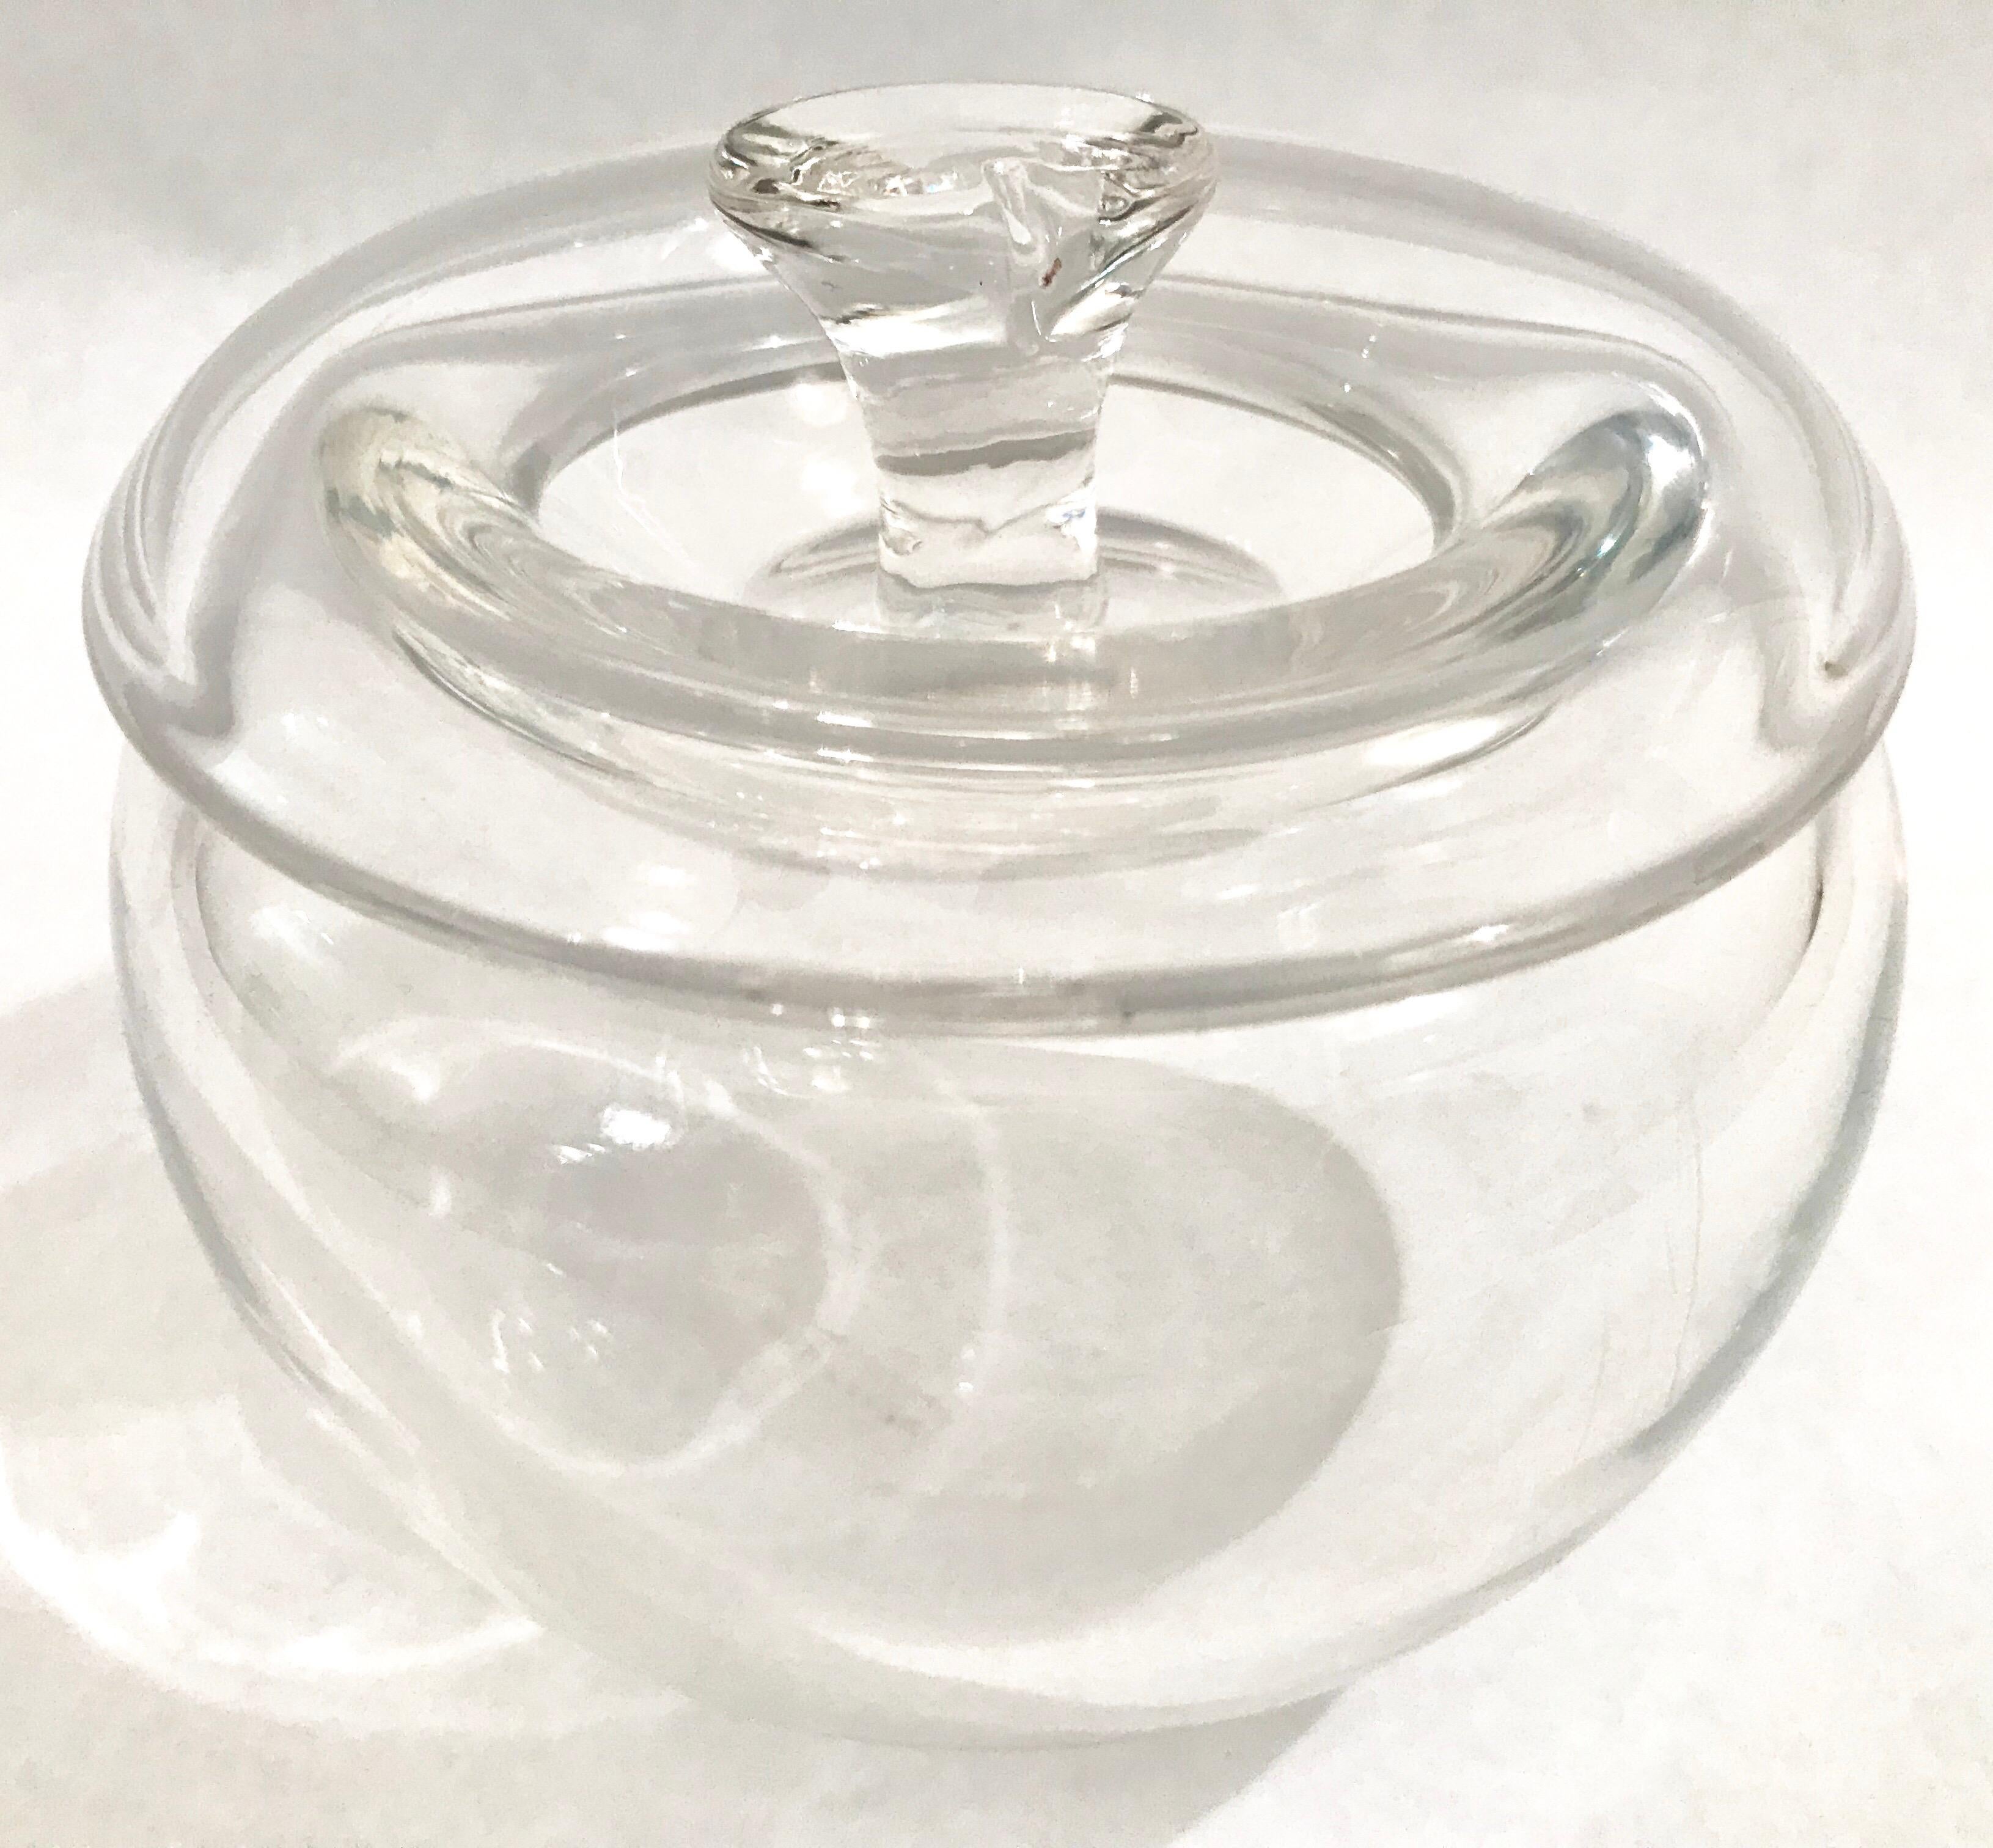 Elsa Peretti for Tiffany & Co. clear crystal glass lidded bowl in the form of an apple.